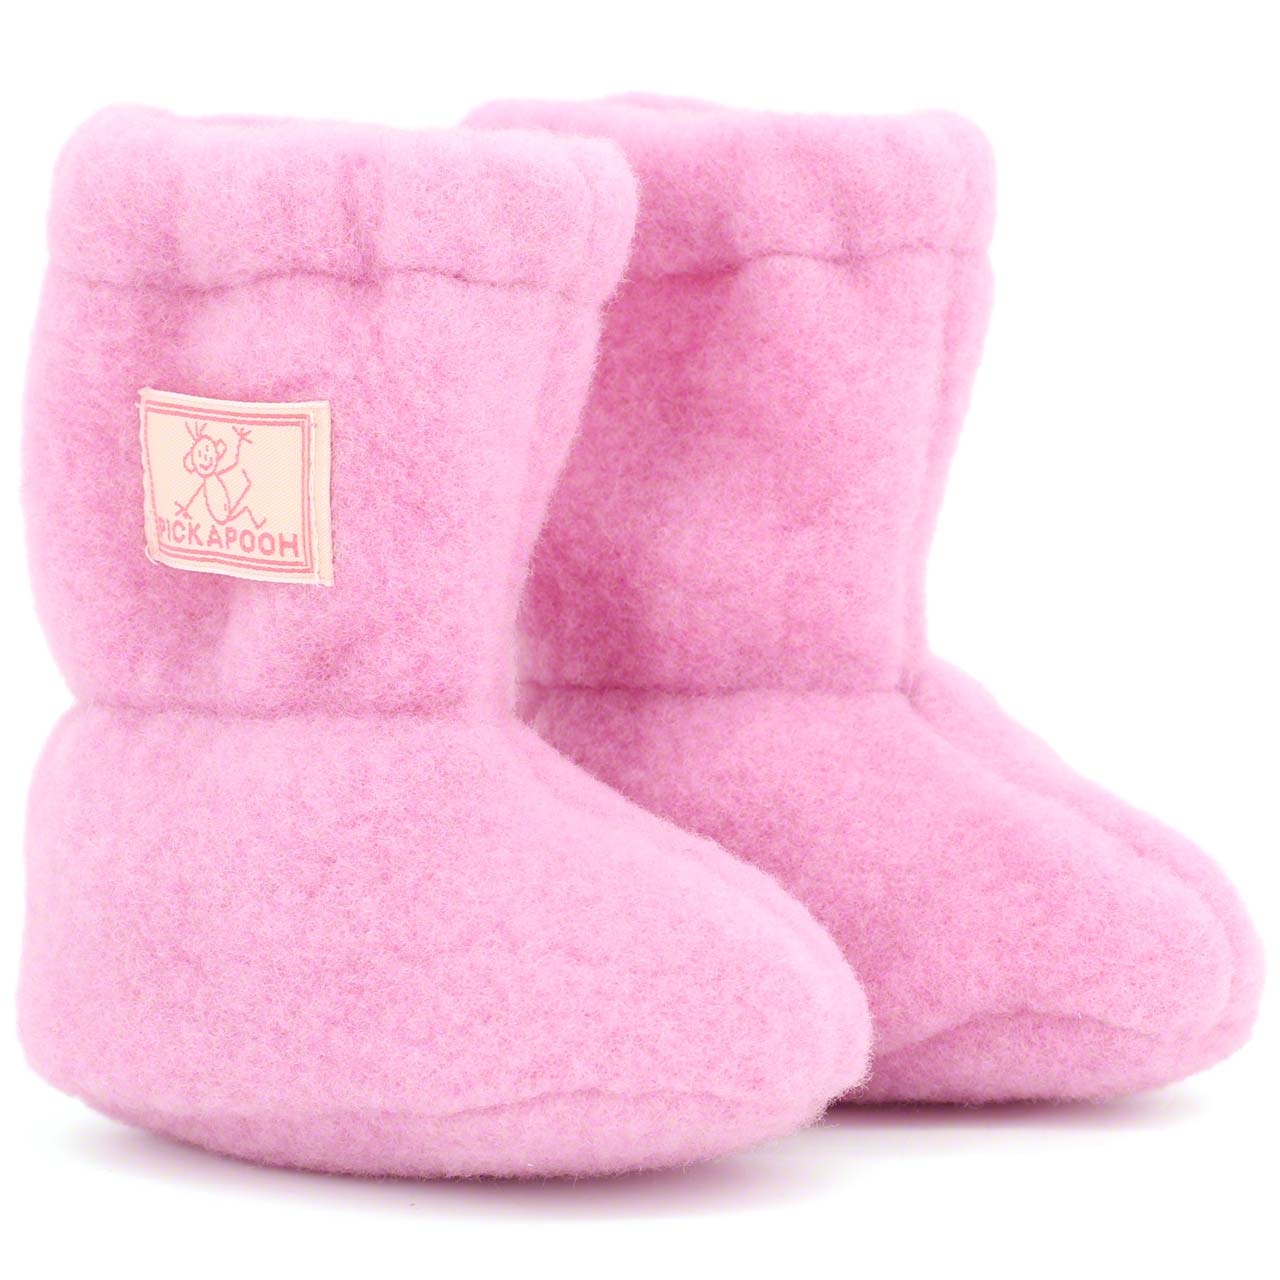 Woll Stiefel Baby rosa